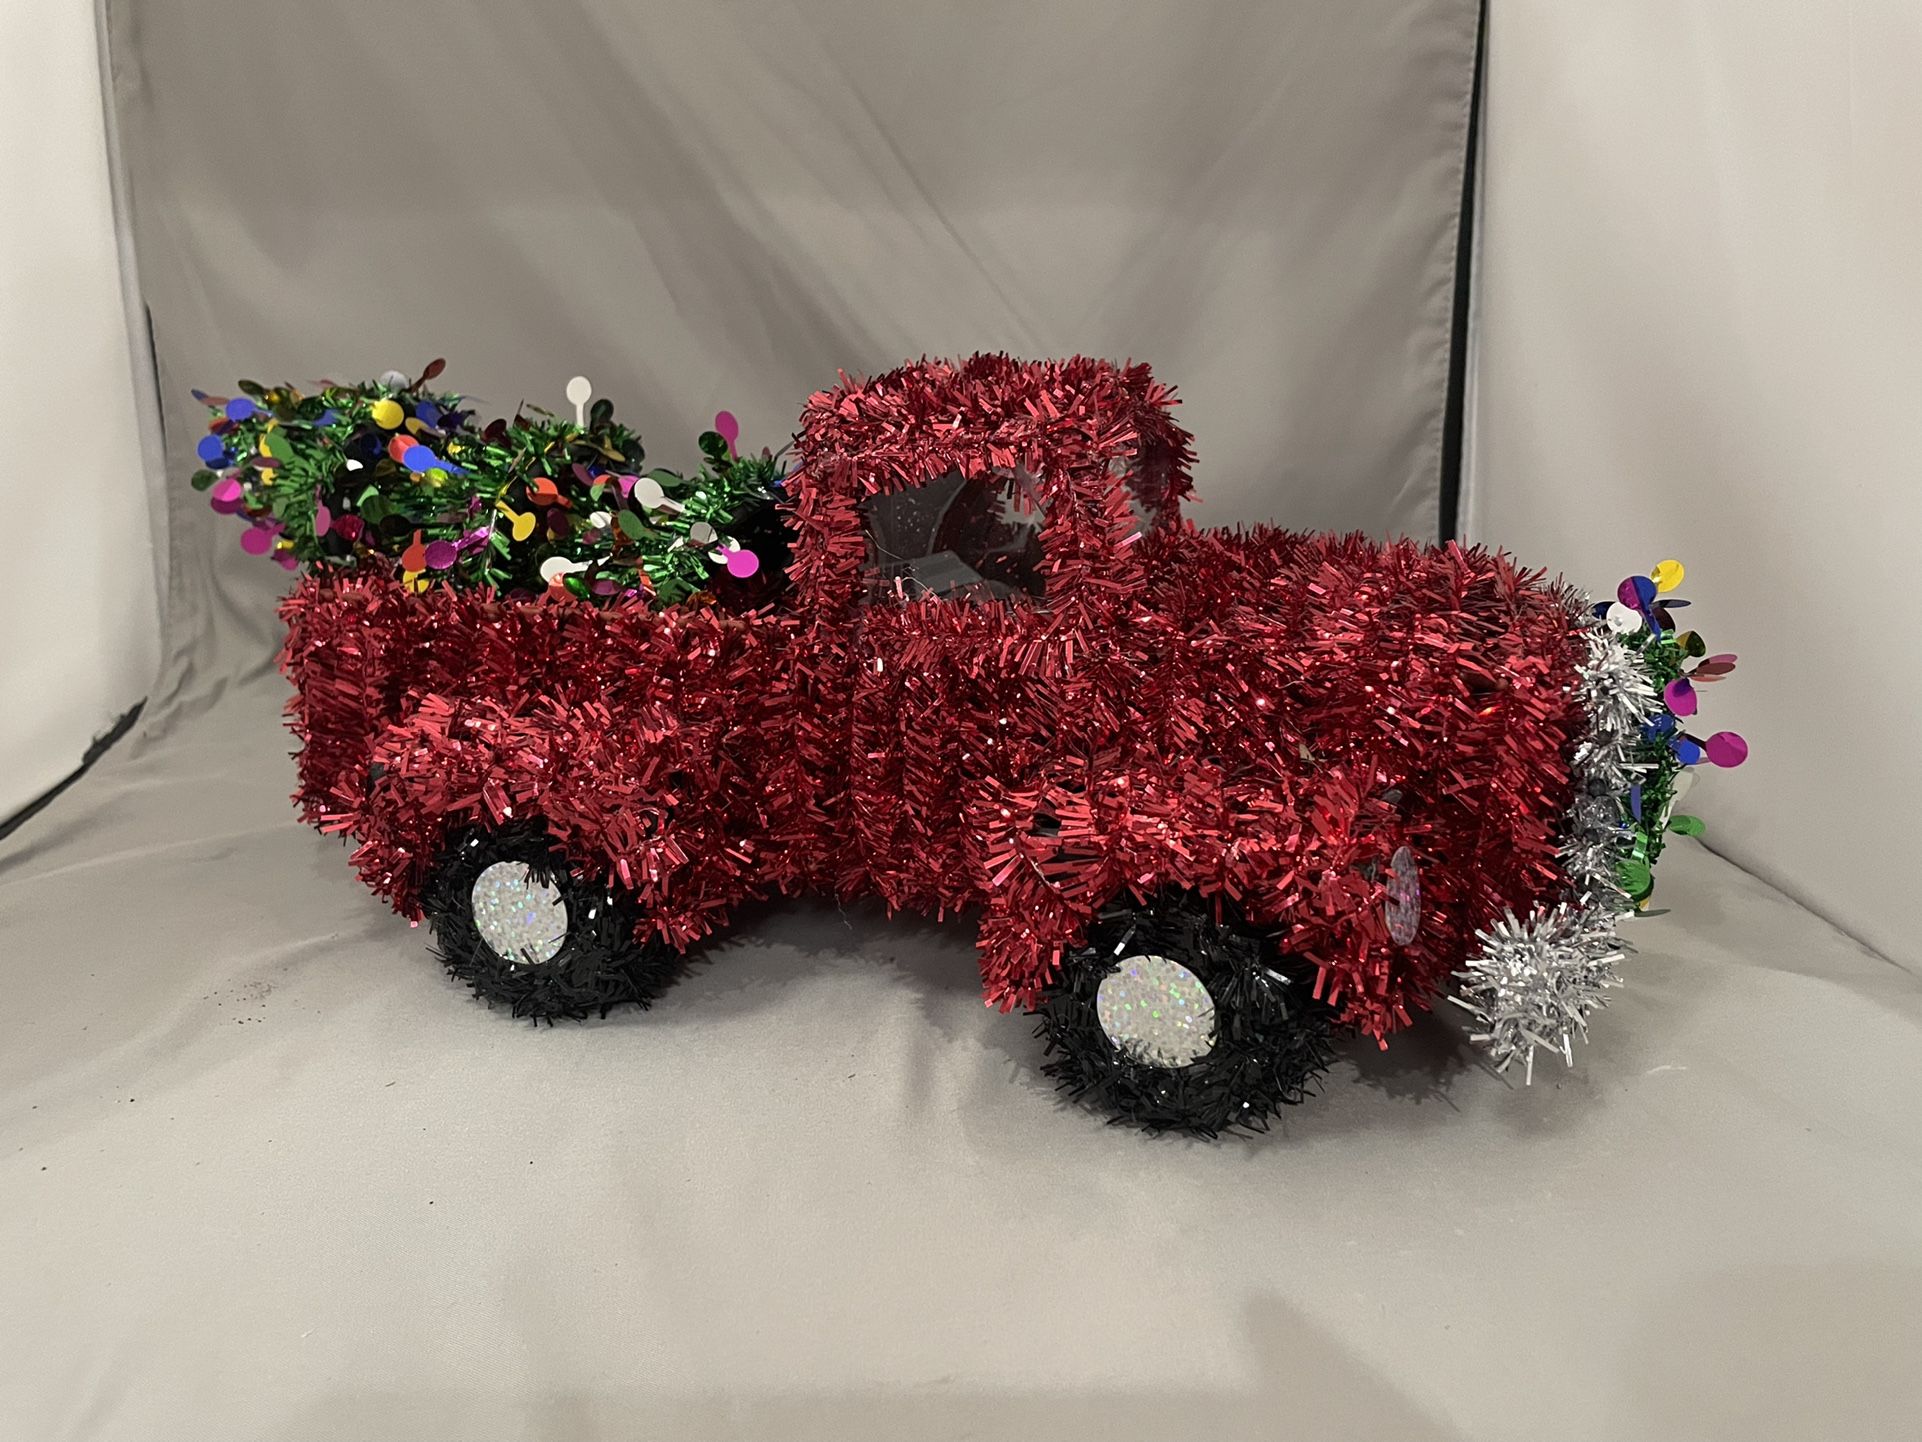 Red Tinsel Decorated Truck With Christmas Tree and Wreath Decoration 